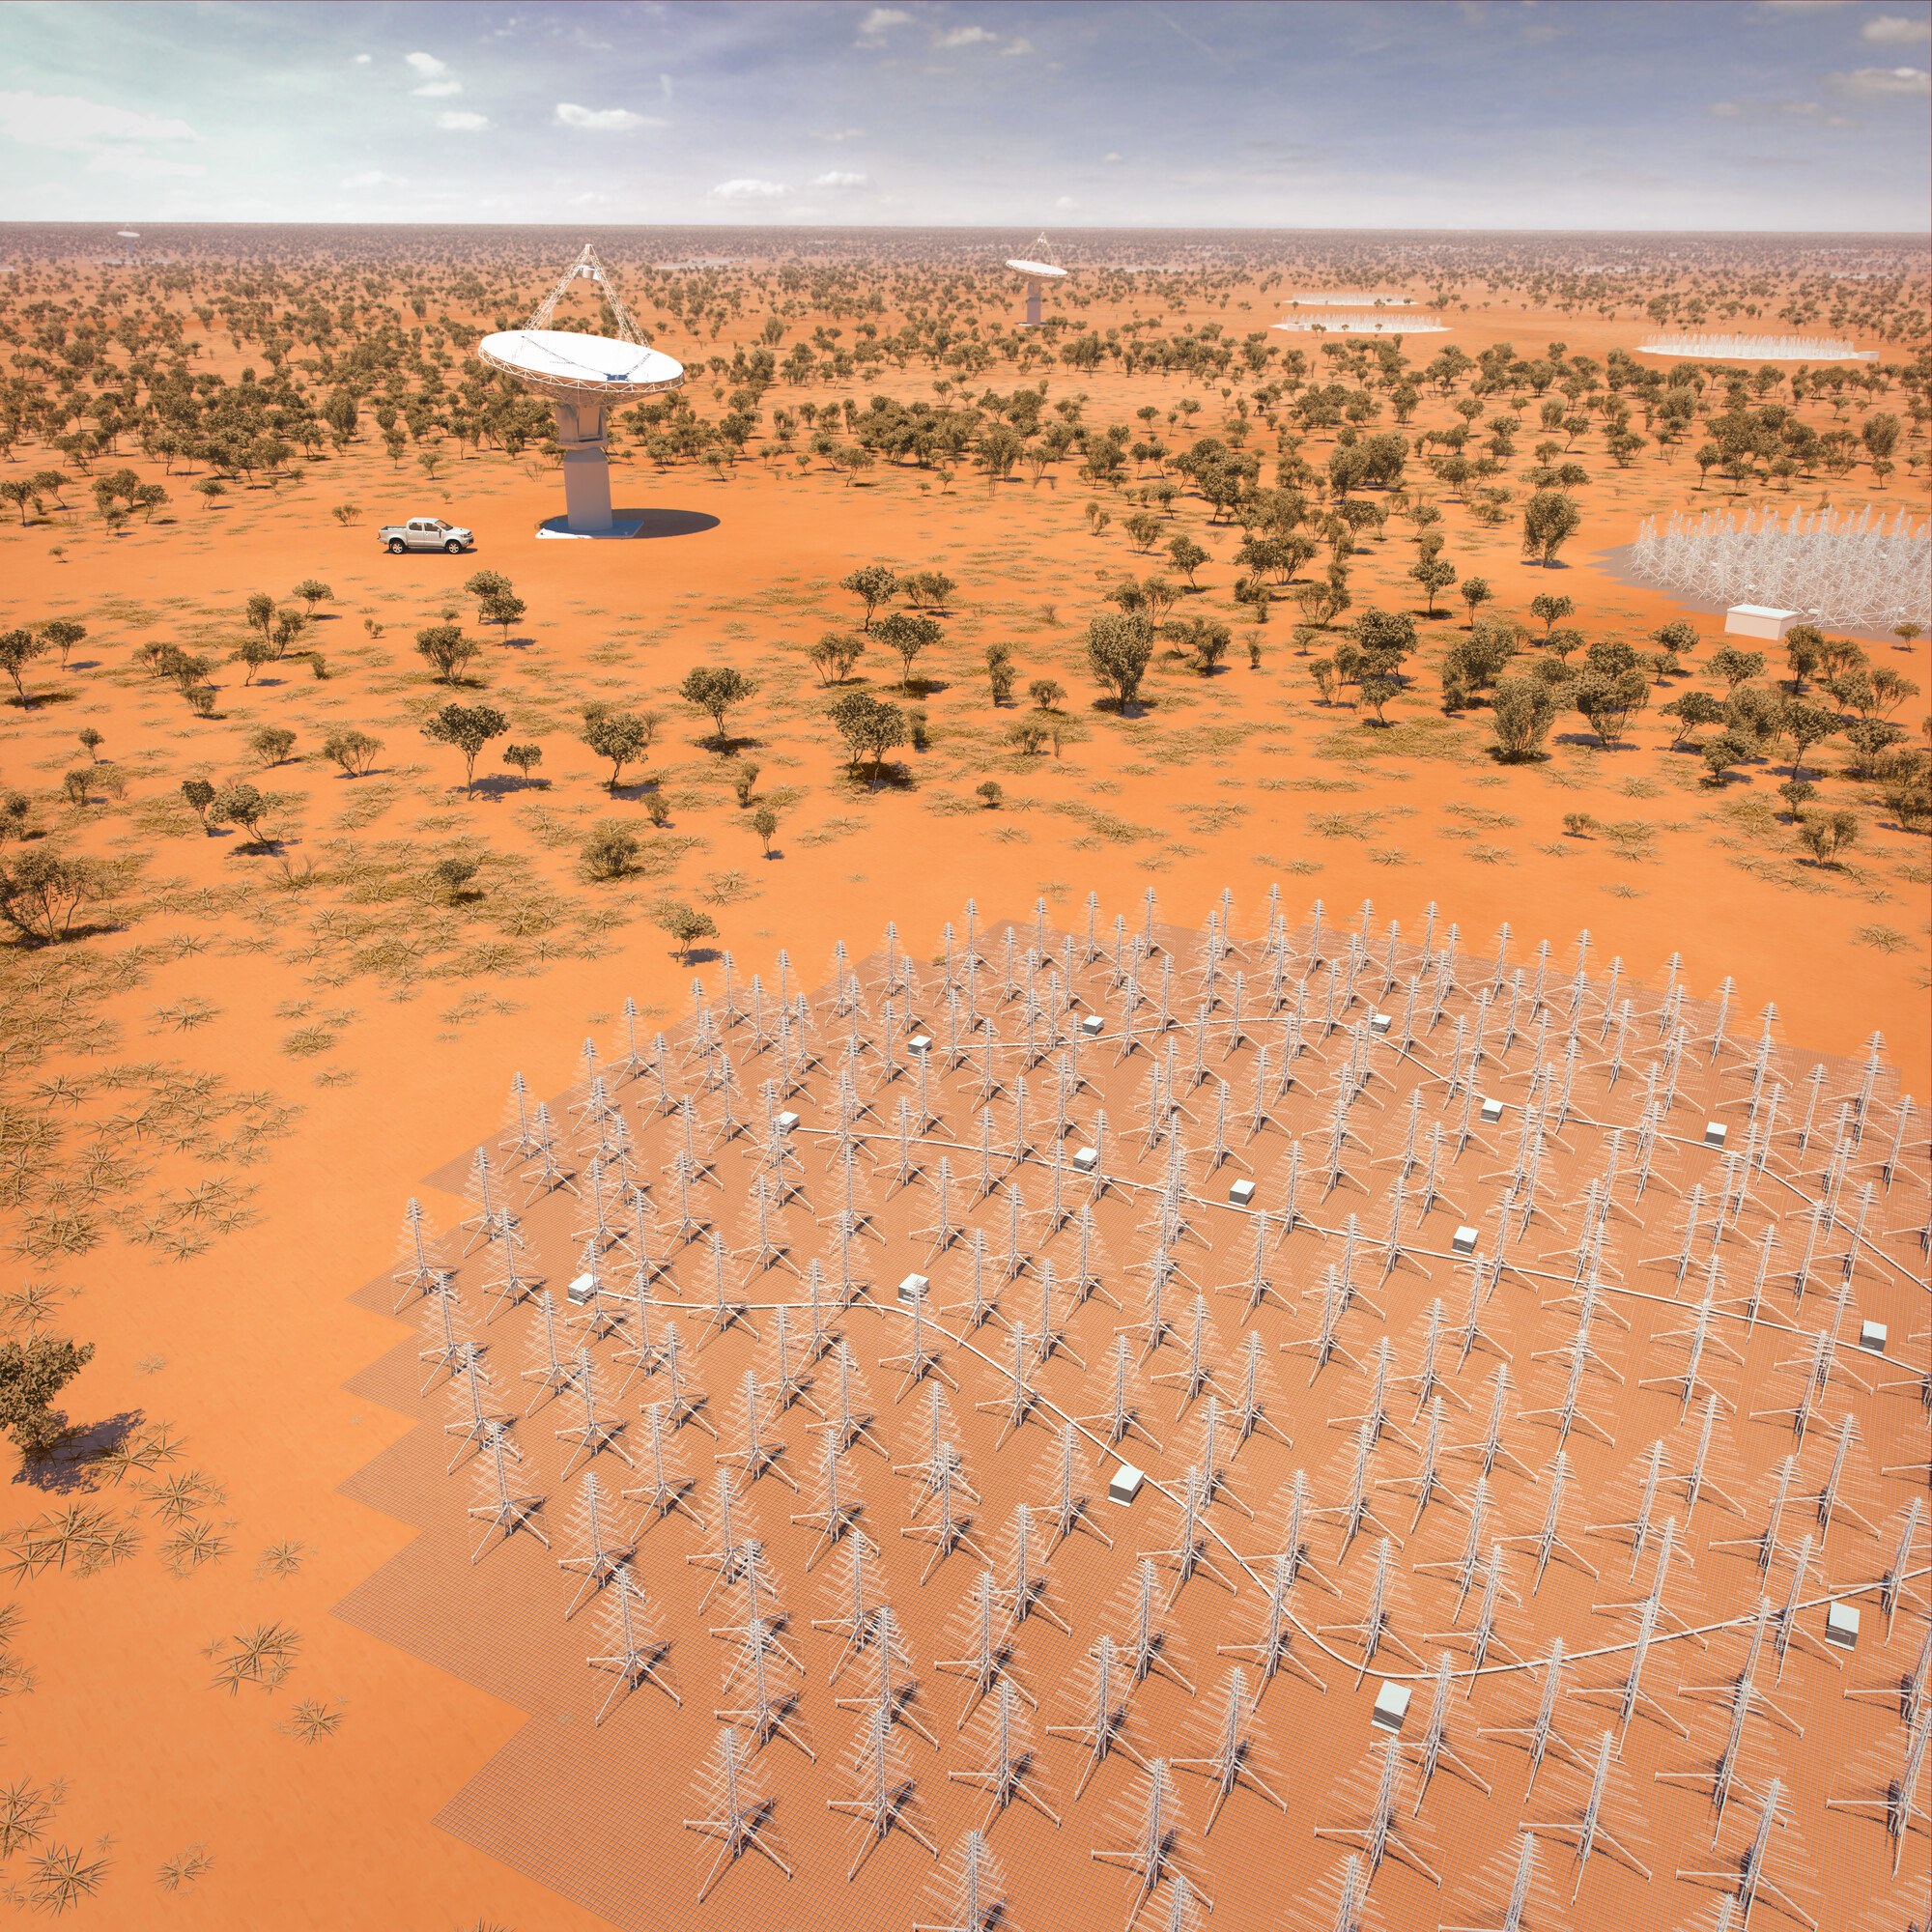 Artist's impression of the low-frequency antennas in the desert in Western Australia, they look a bit like wire Christmas trees.